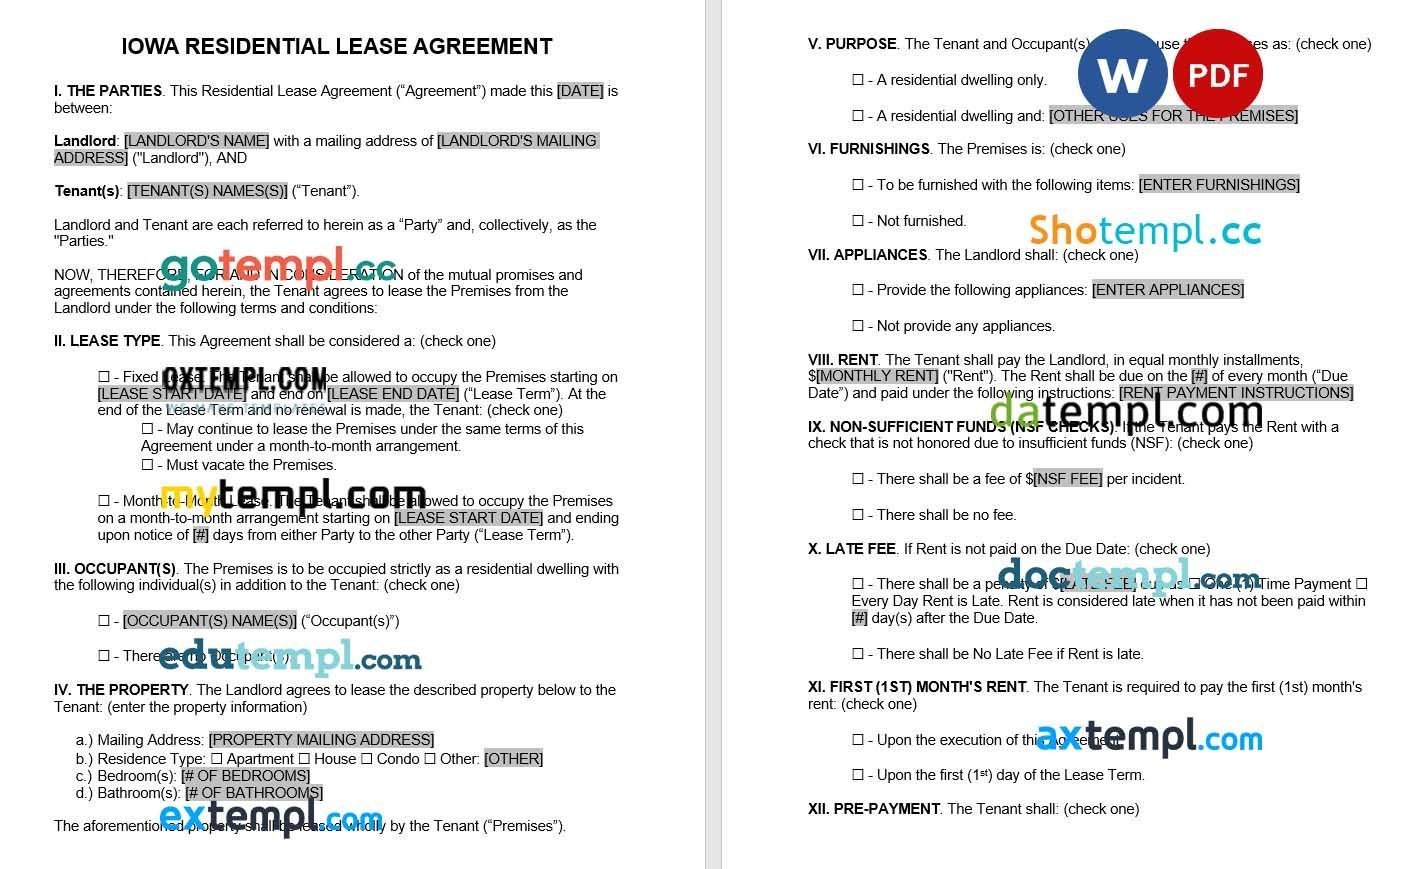 Iowa Residential Lease Agreement Word example, fully editable